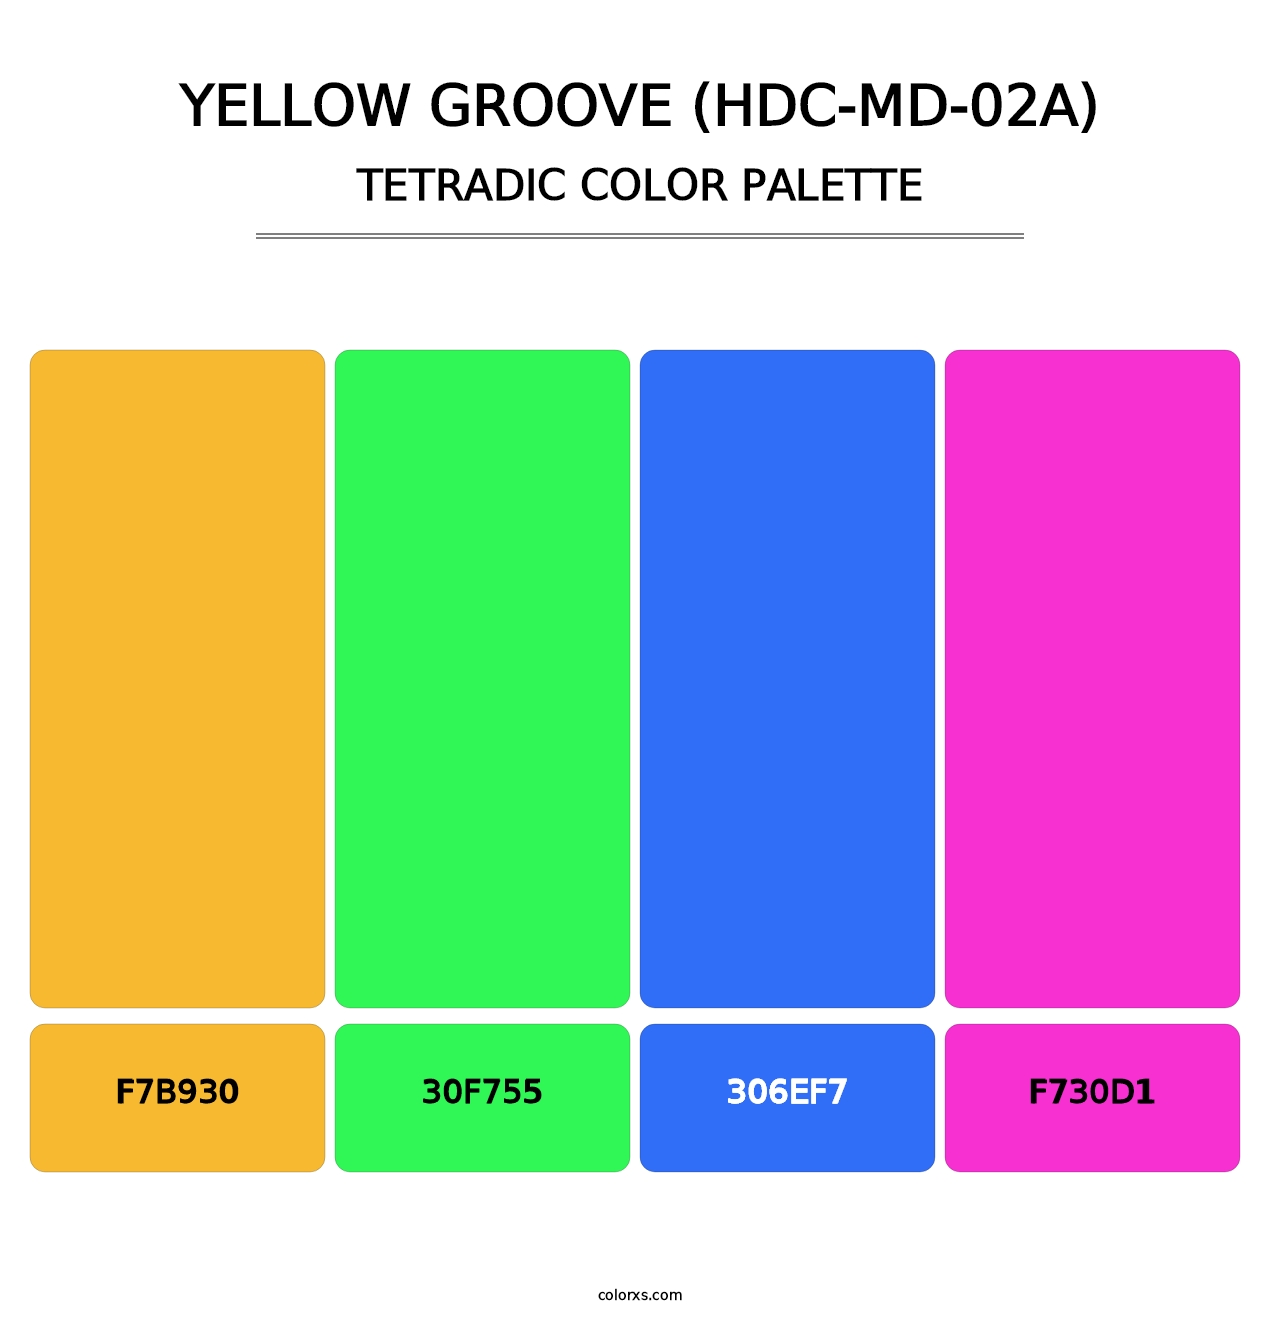 Yellow Groove (HDC-MD-02A) - Tetradic Color Palette